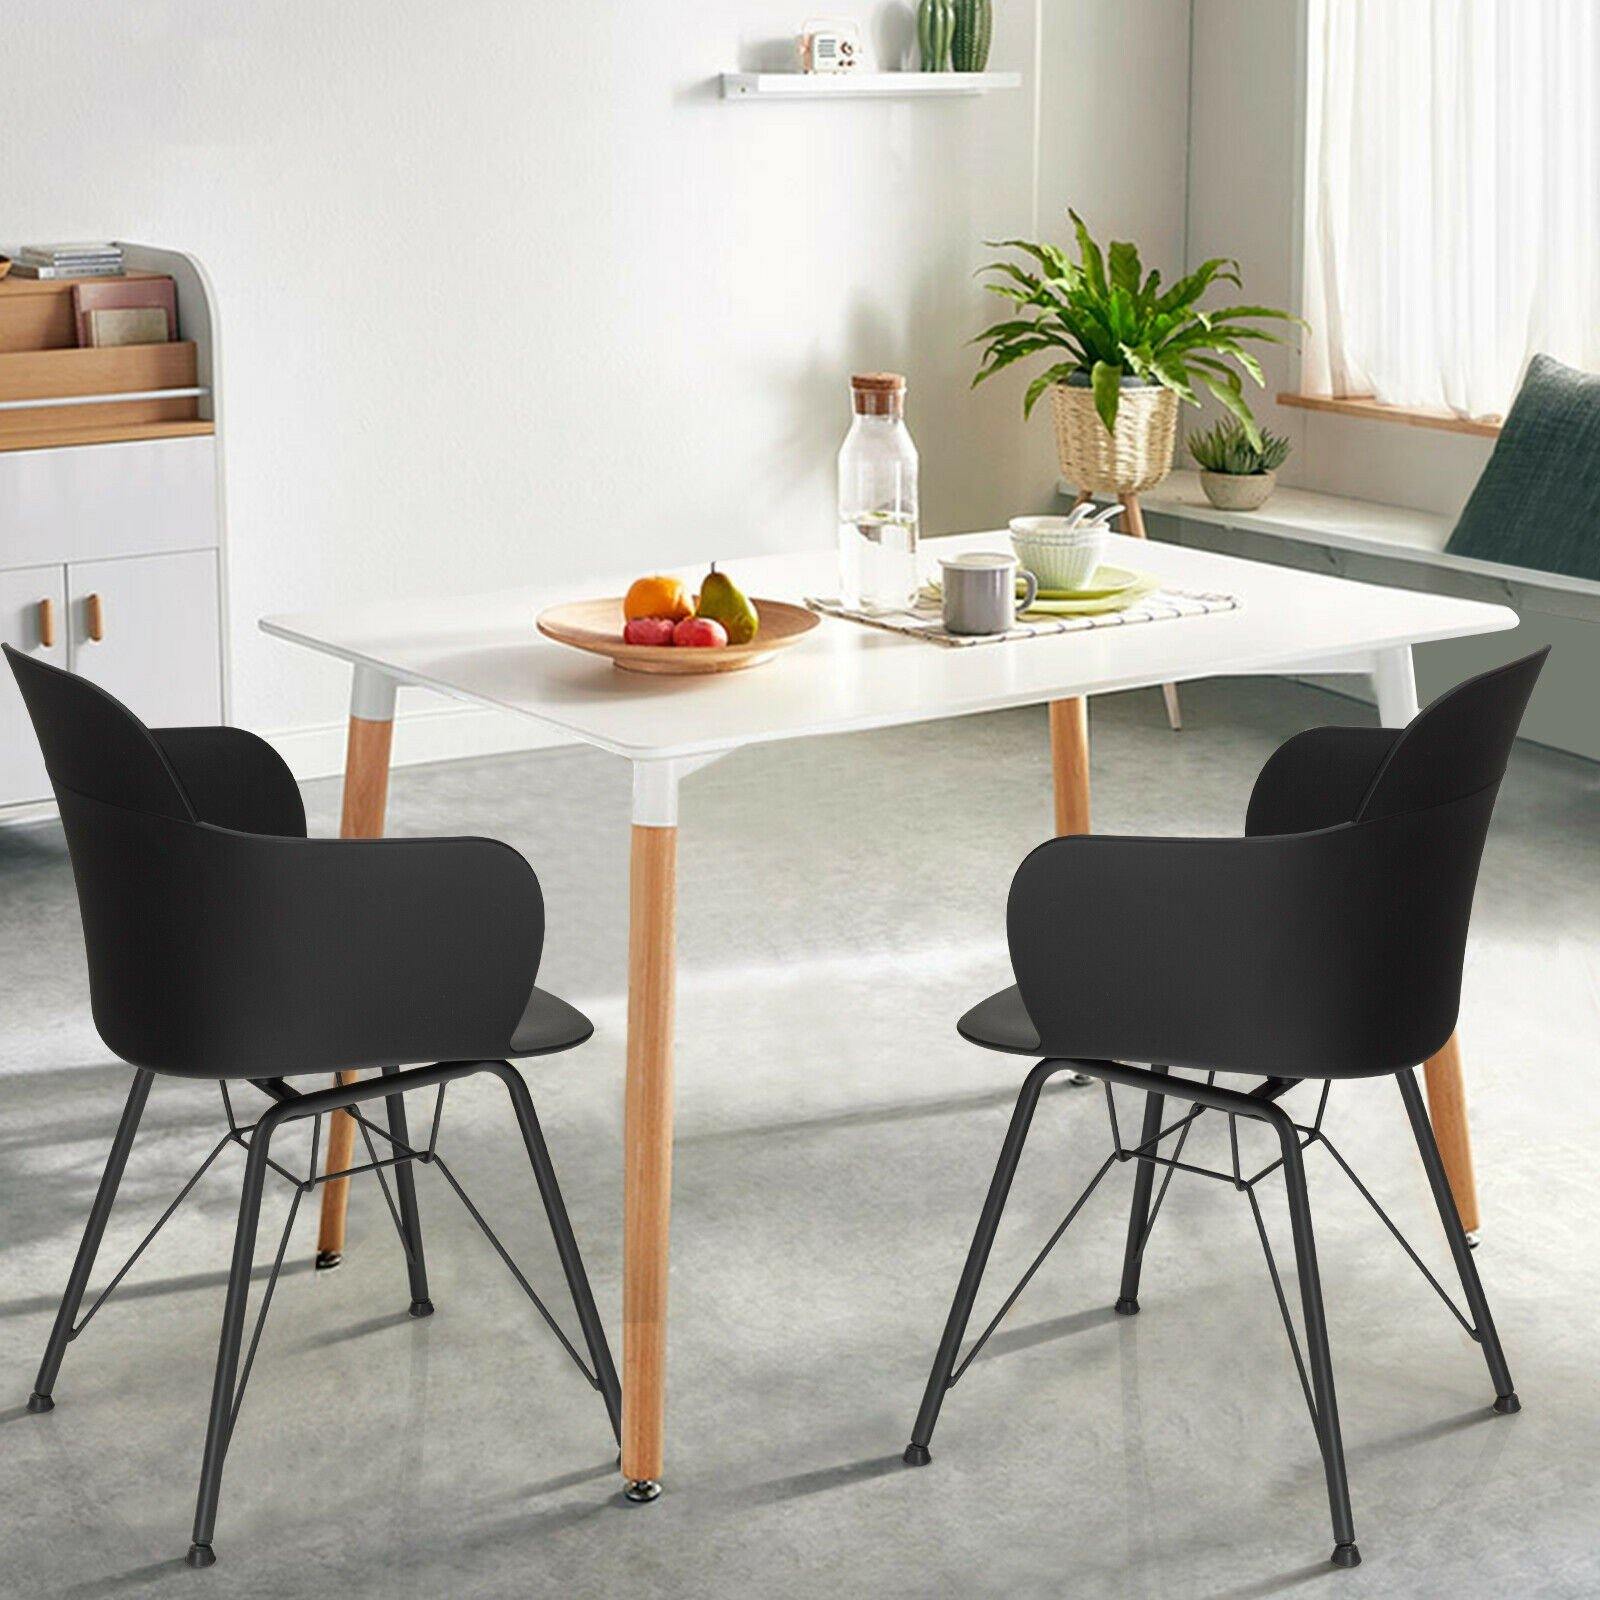 Dining Chairs, Pre Assembled Modern Style Plastic Dining Chair w/Metal Legs - Giantexus